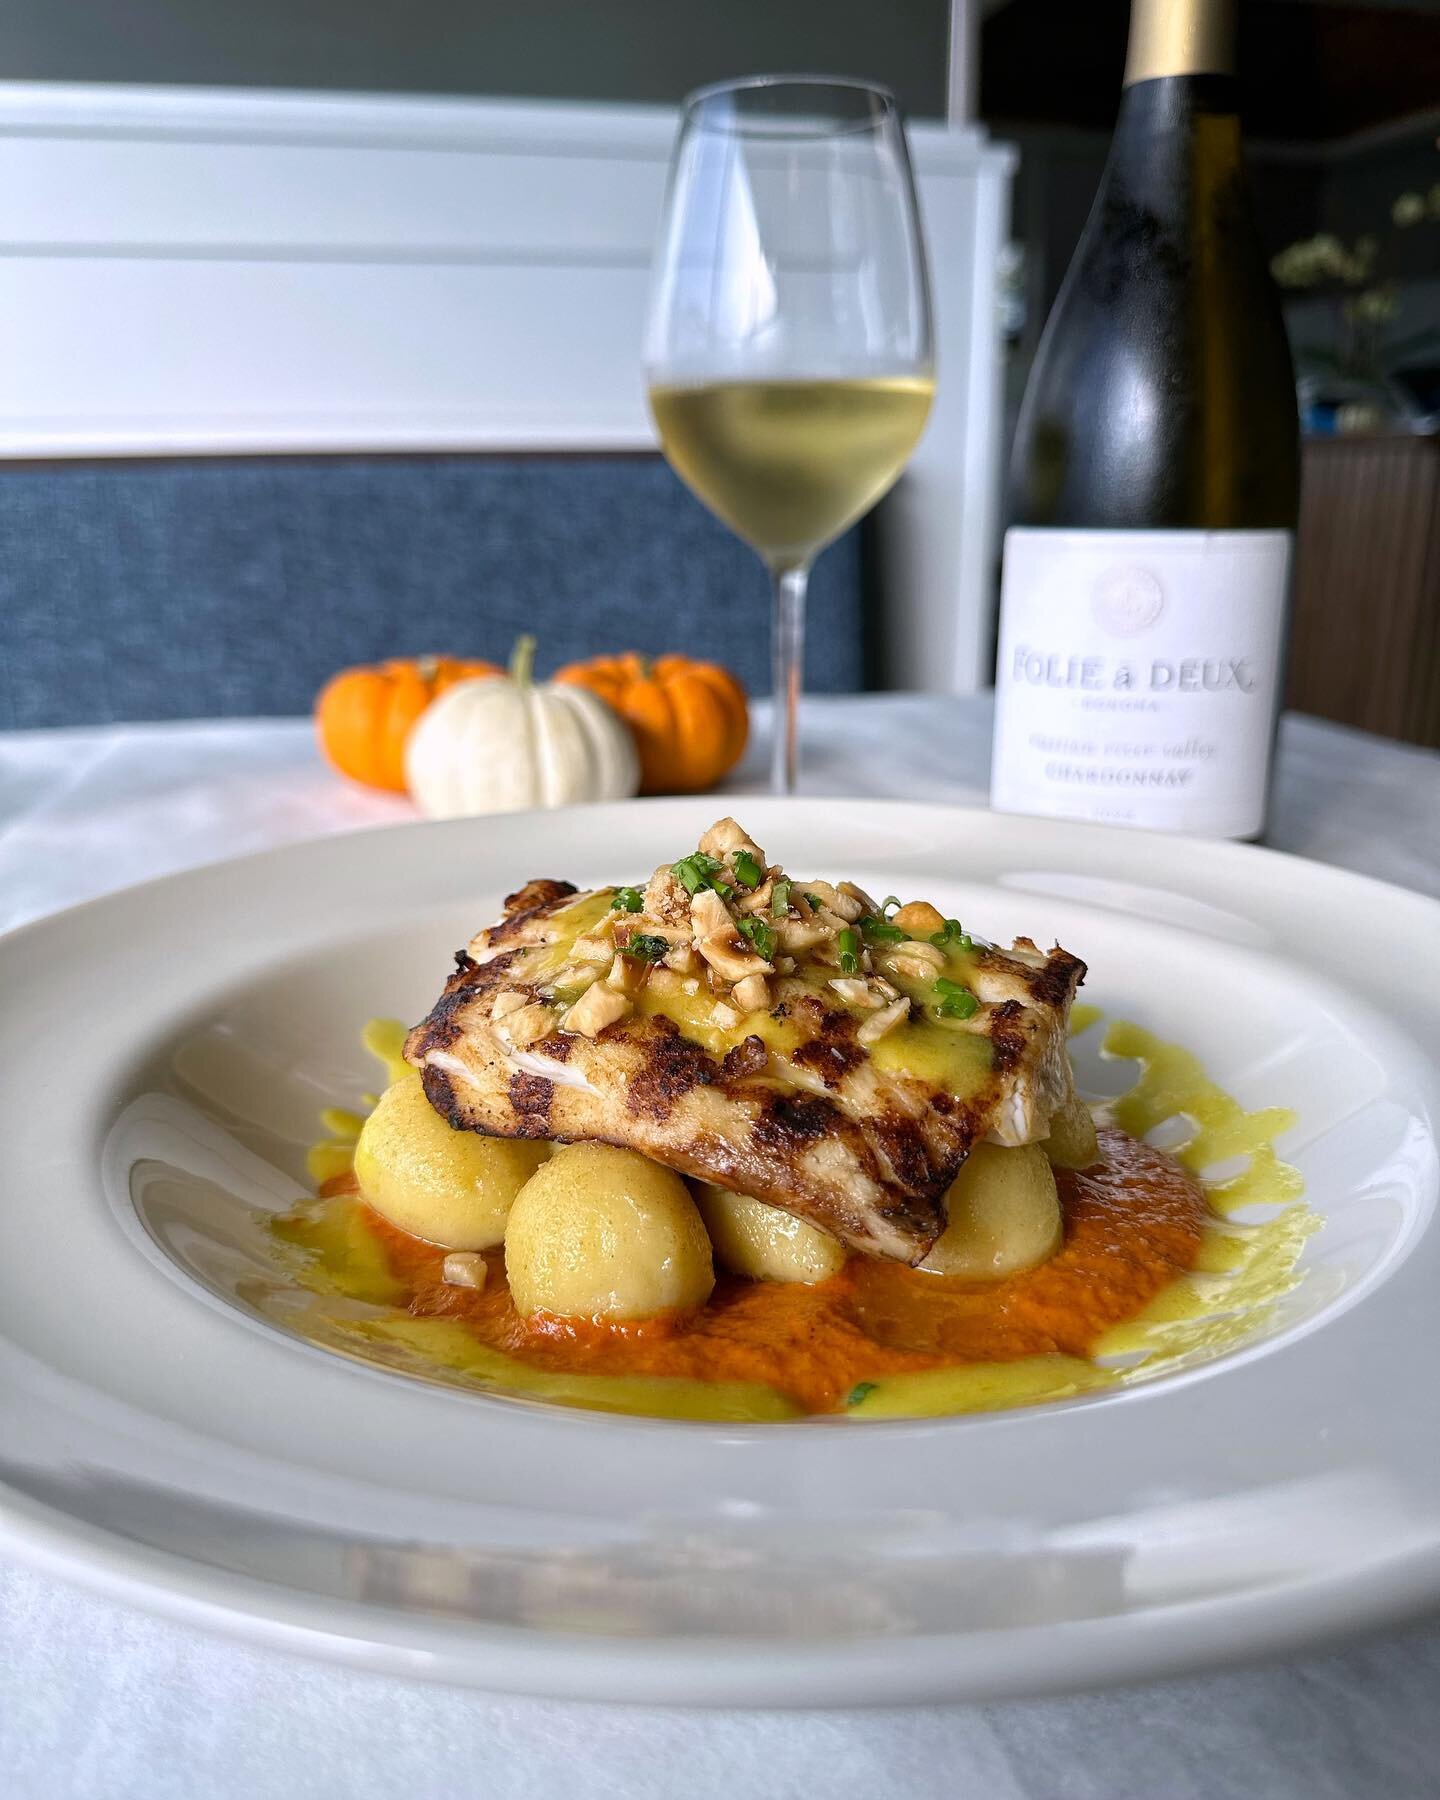 This weeks special we have the delightful grilled Tripletail on a bed of Asiago filled gnocchi, romesco sauce and a preserved lemon emulsion. Paired with our new Russian River Chardonnay Folie a Deux. The silky body, complexity, balanced acidity and 